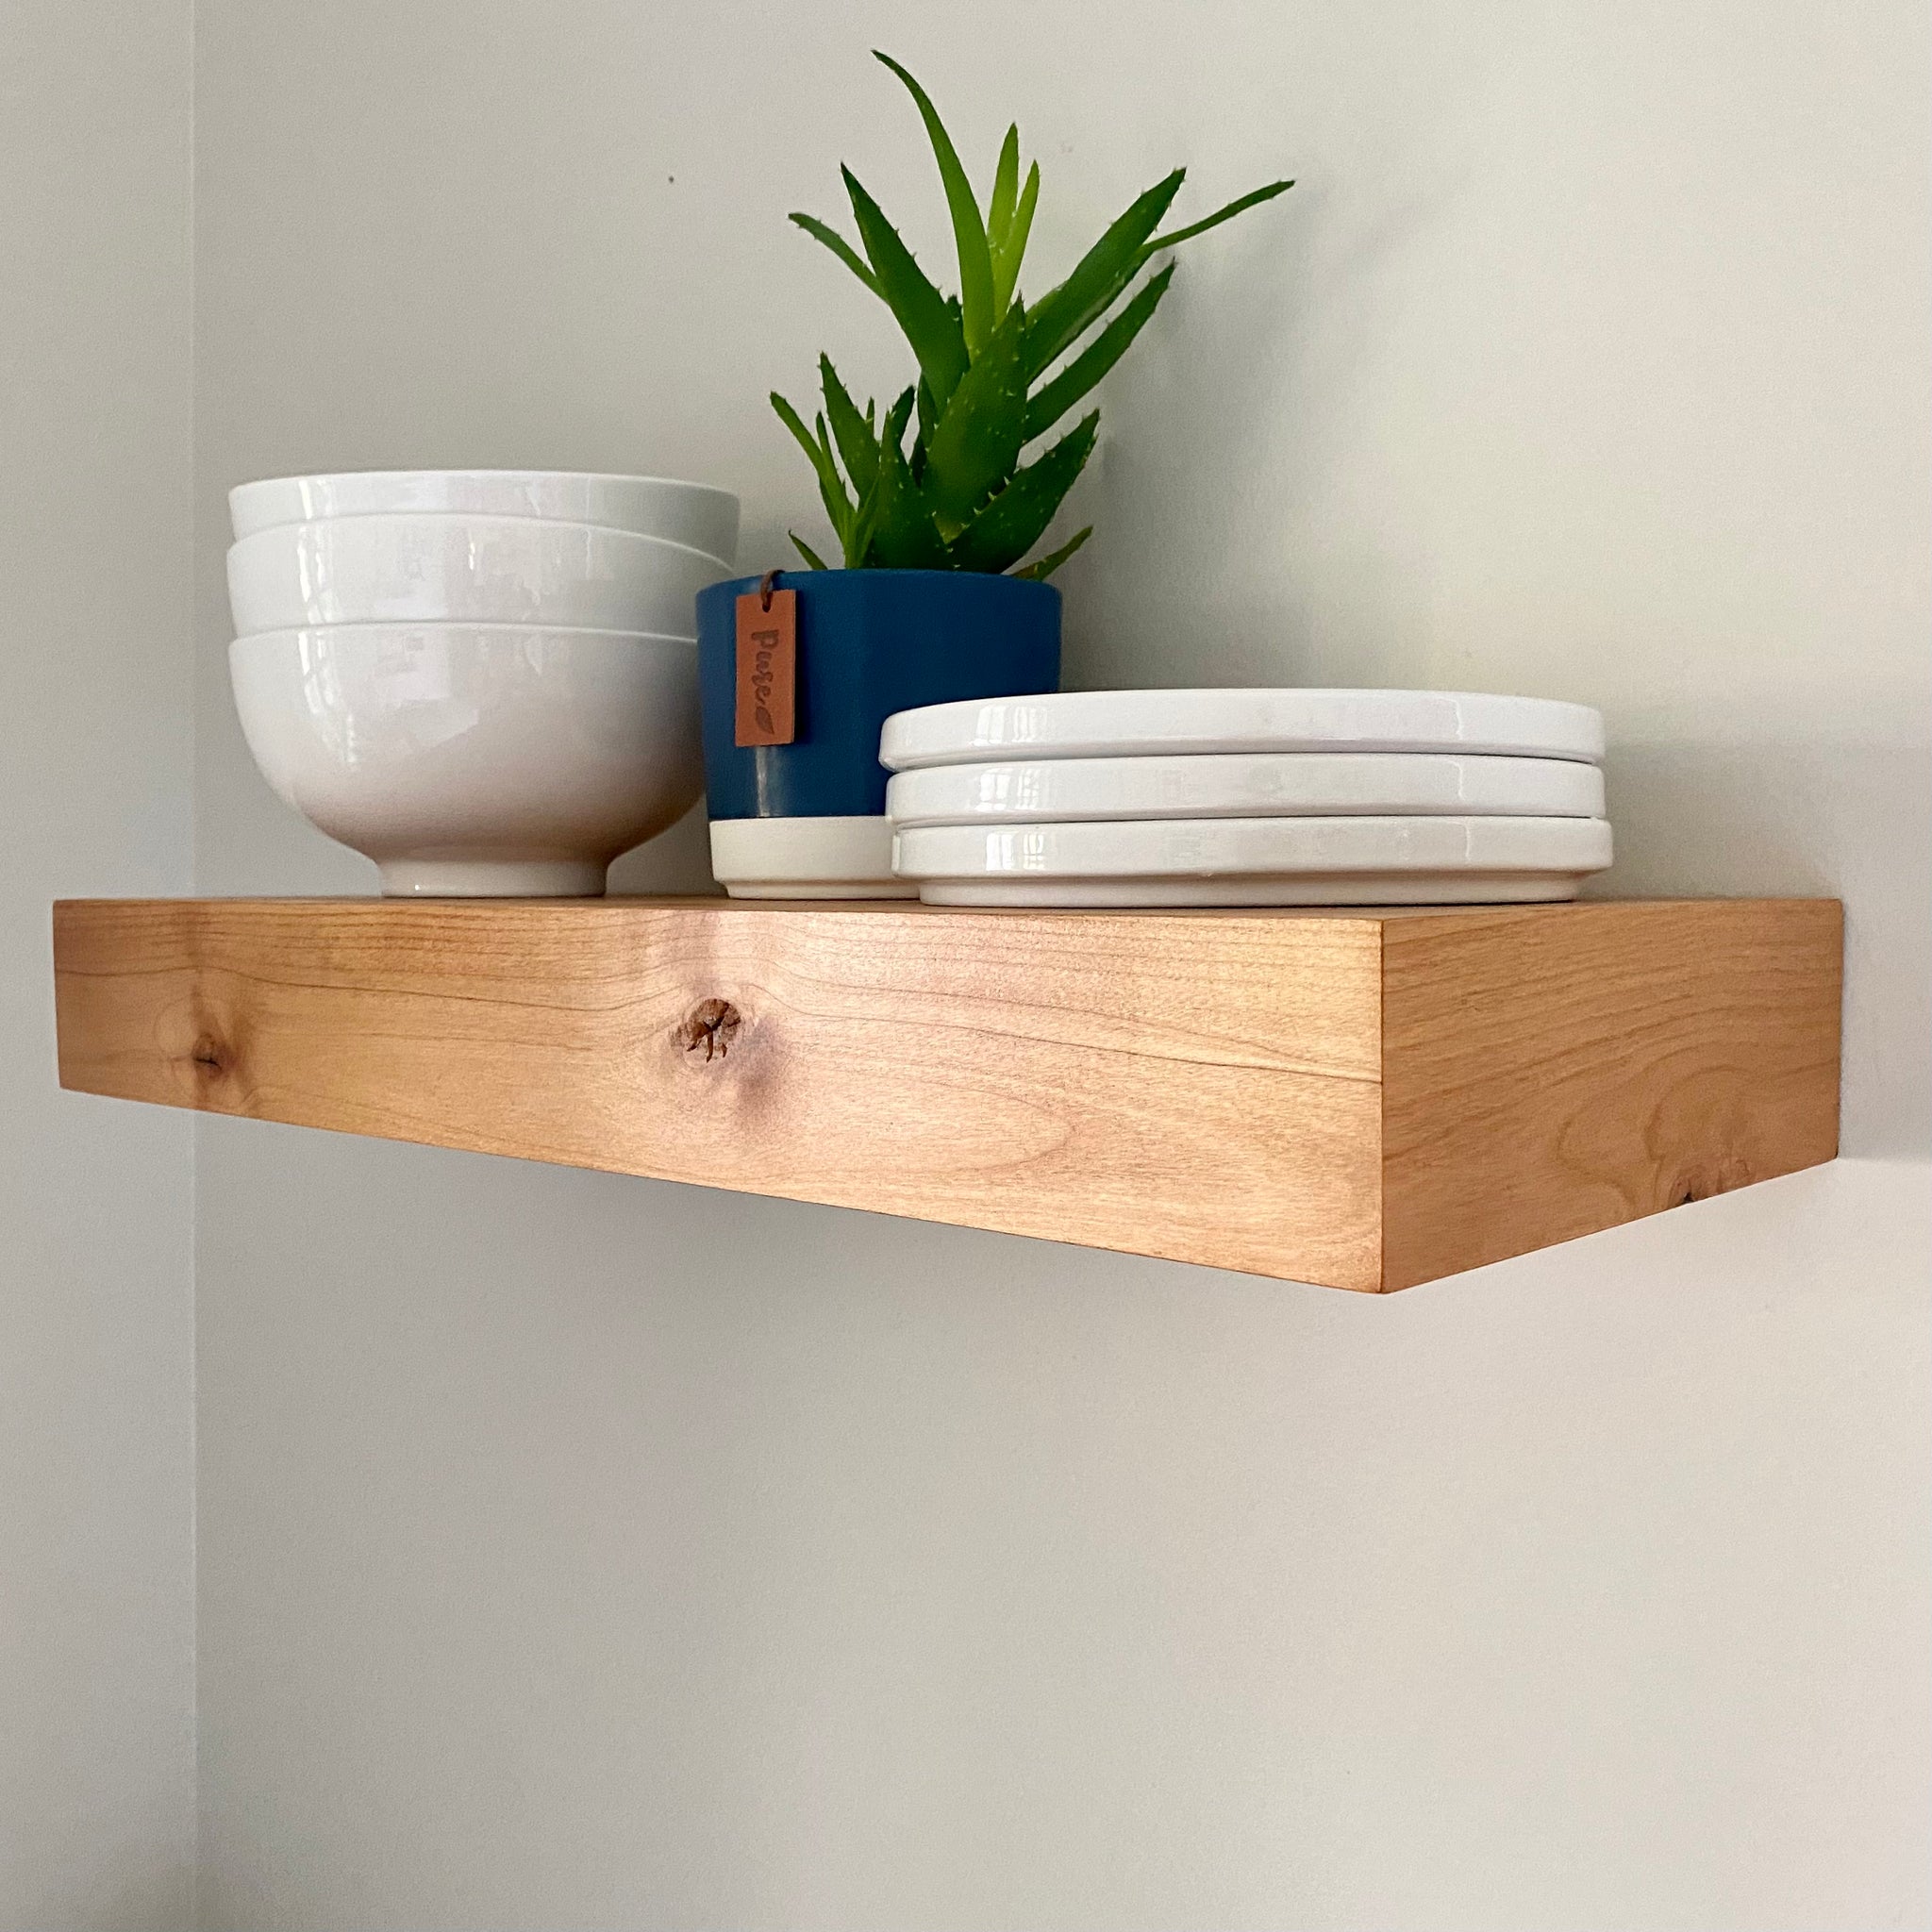 Contemporary Rustic Deep Floating Shelves 12" Deep by 3" tall